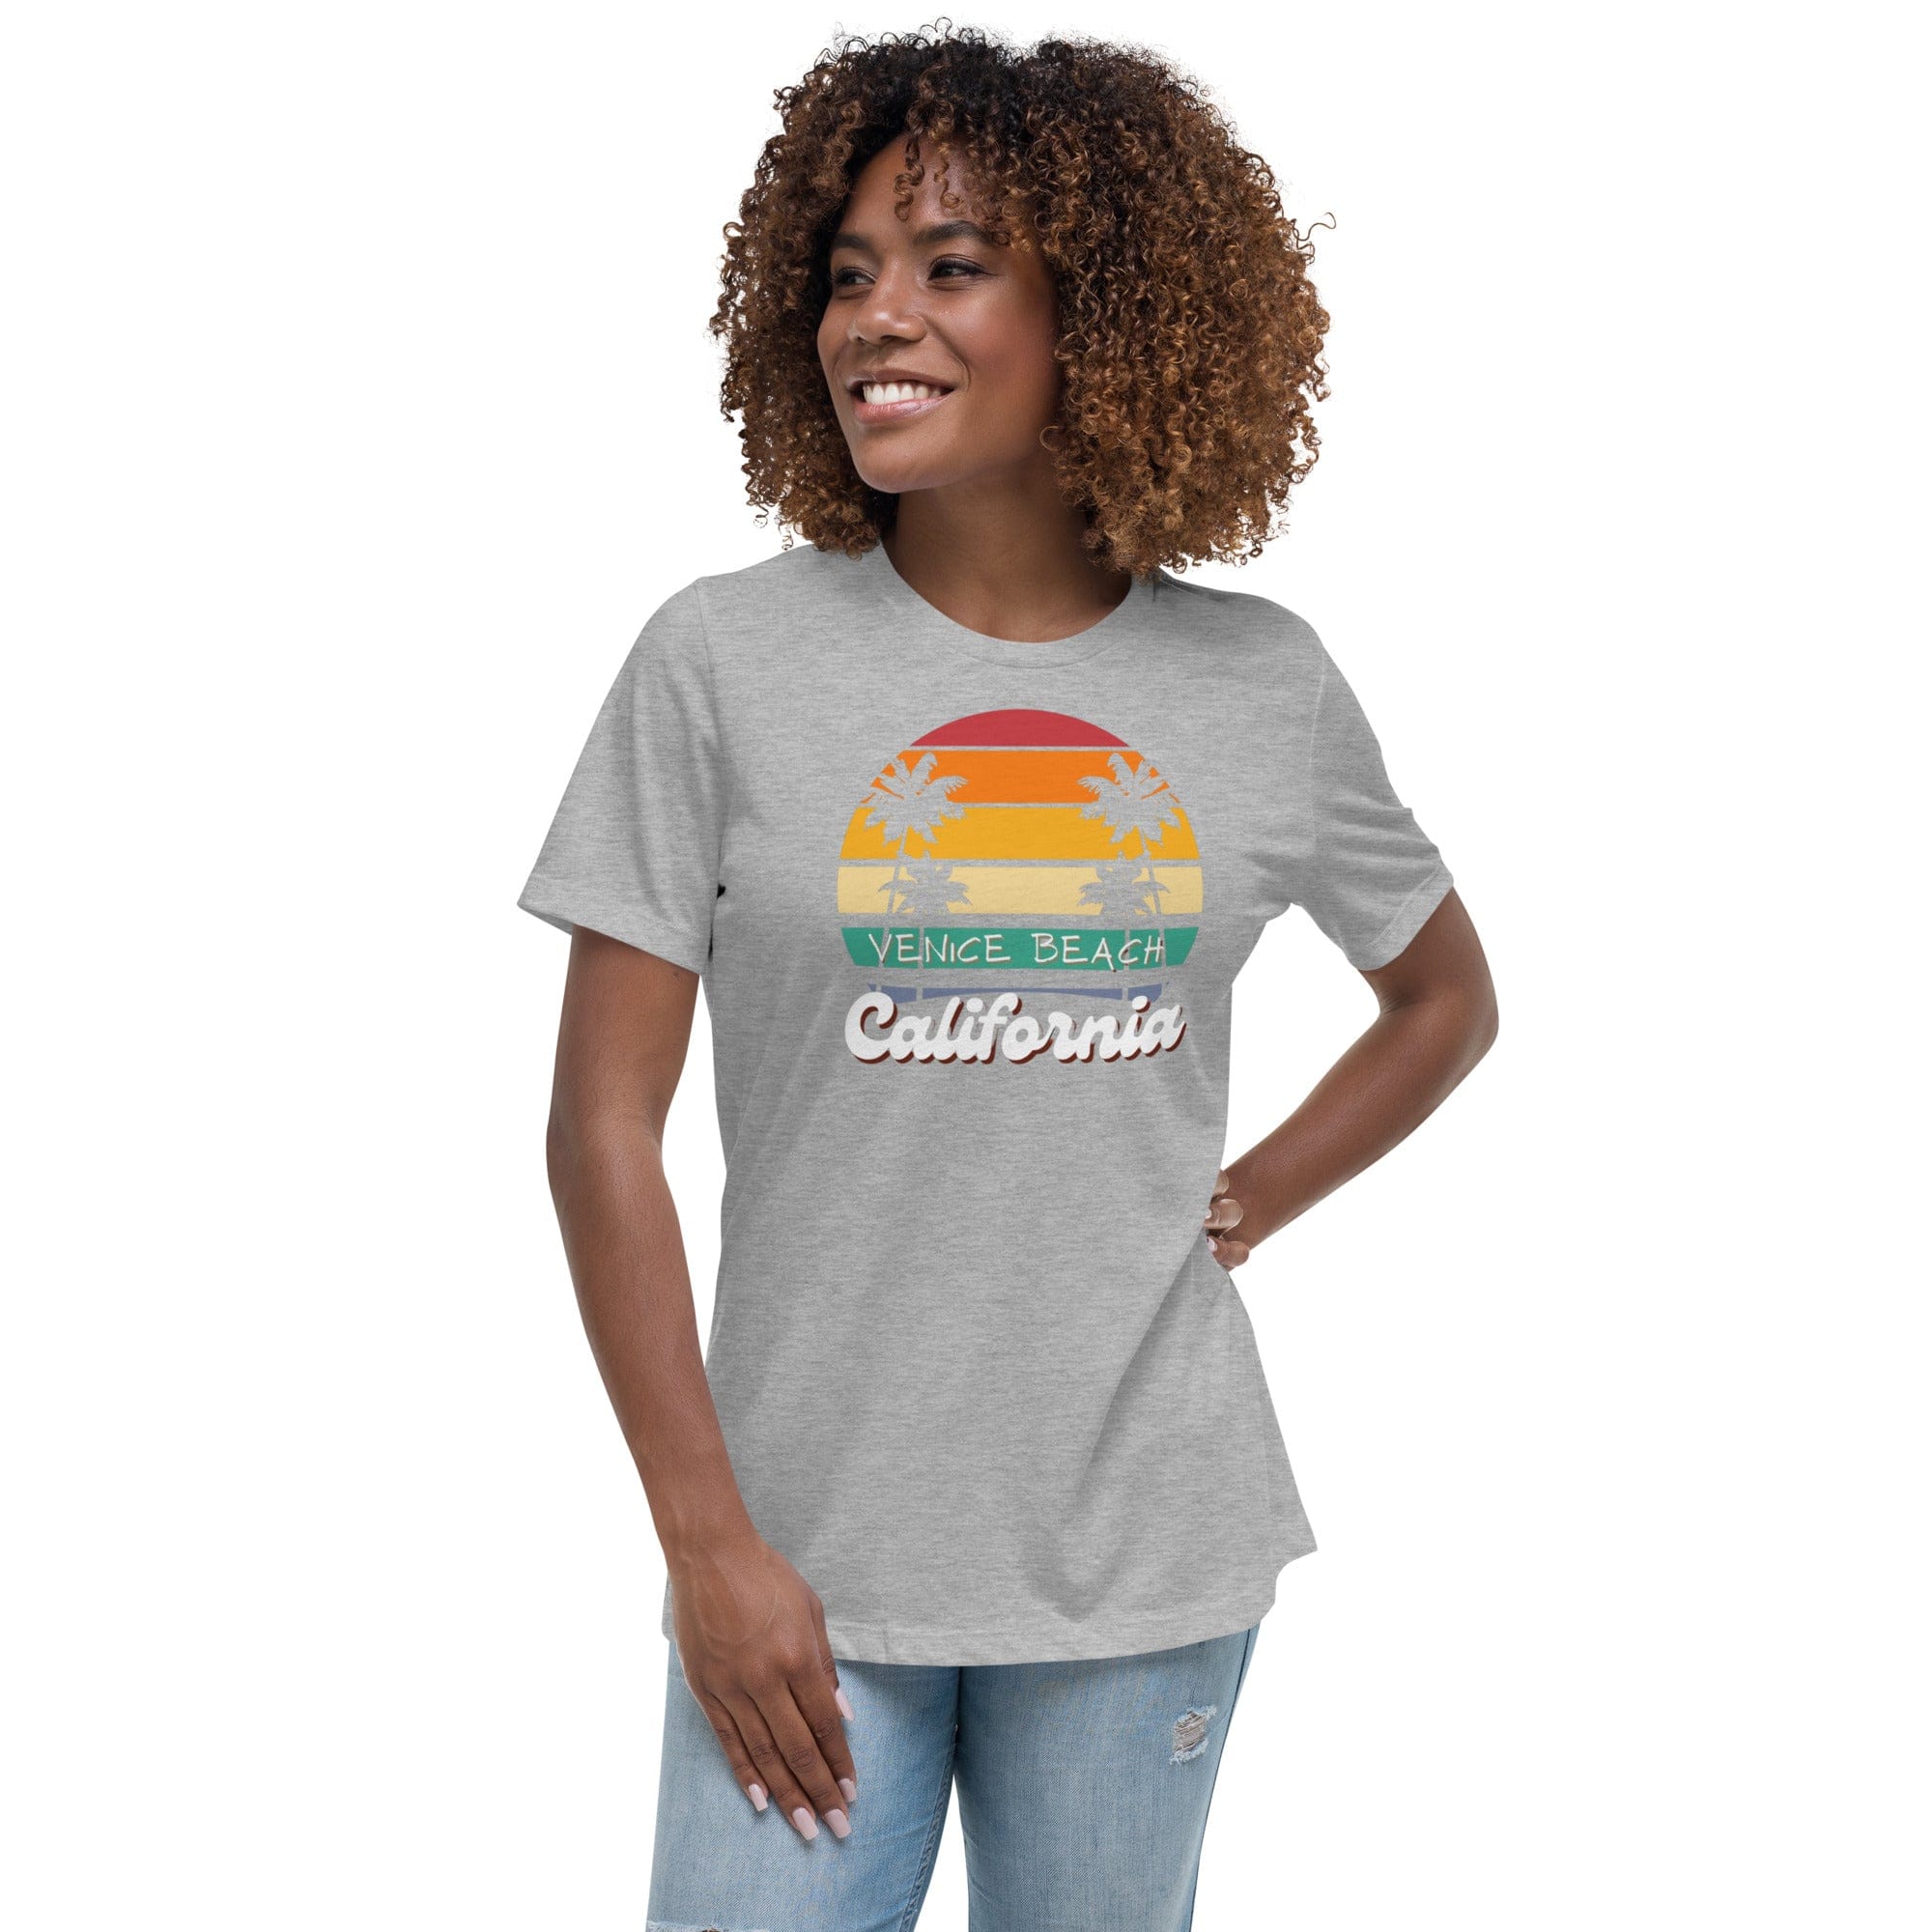 Venice Beach California - Women's Relaxed T-Shirt | Spruced Roost